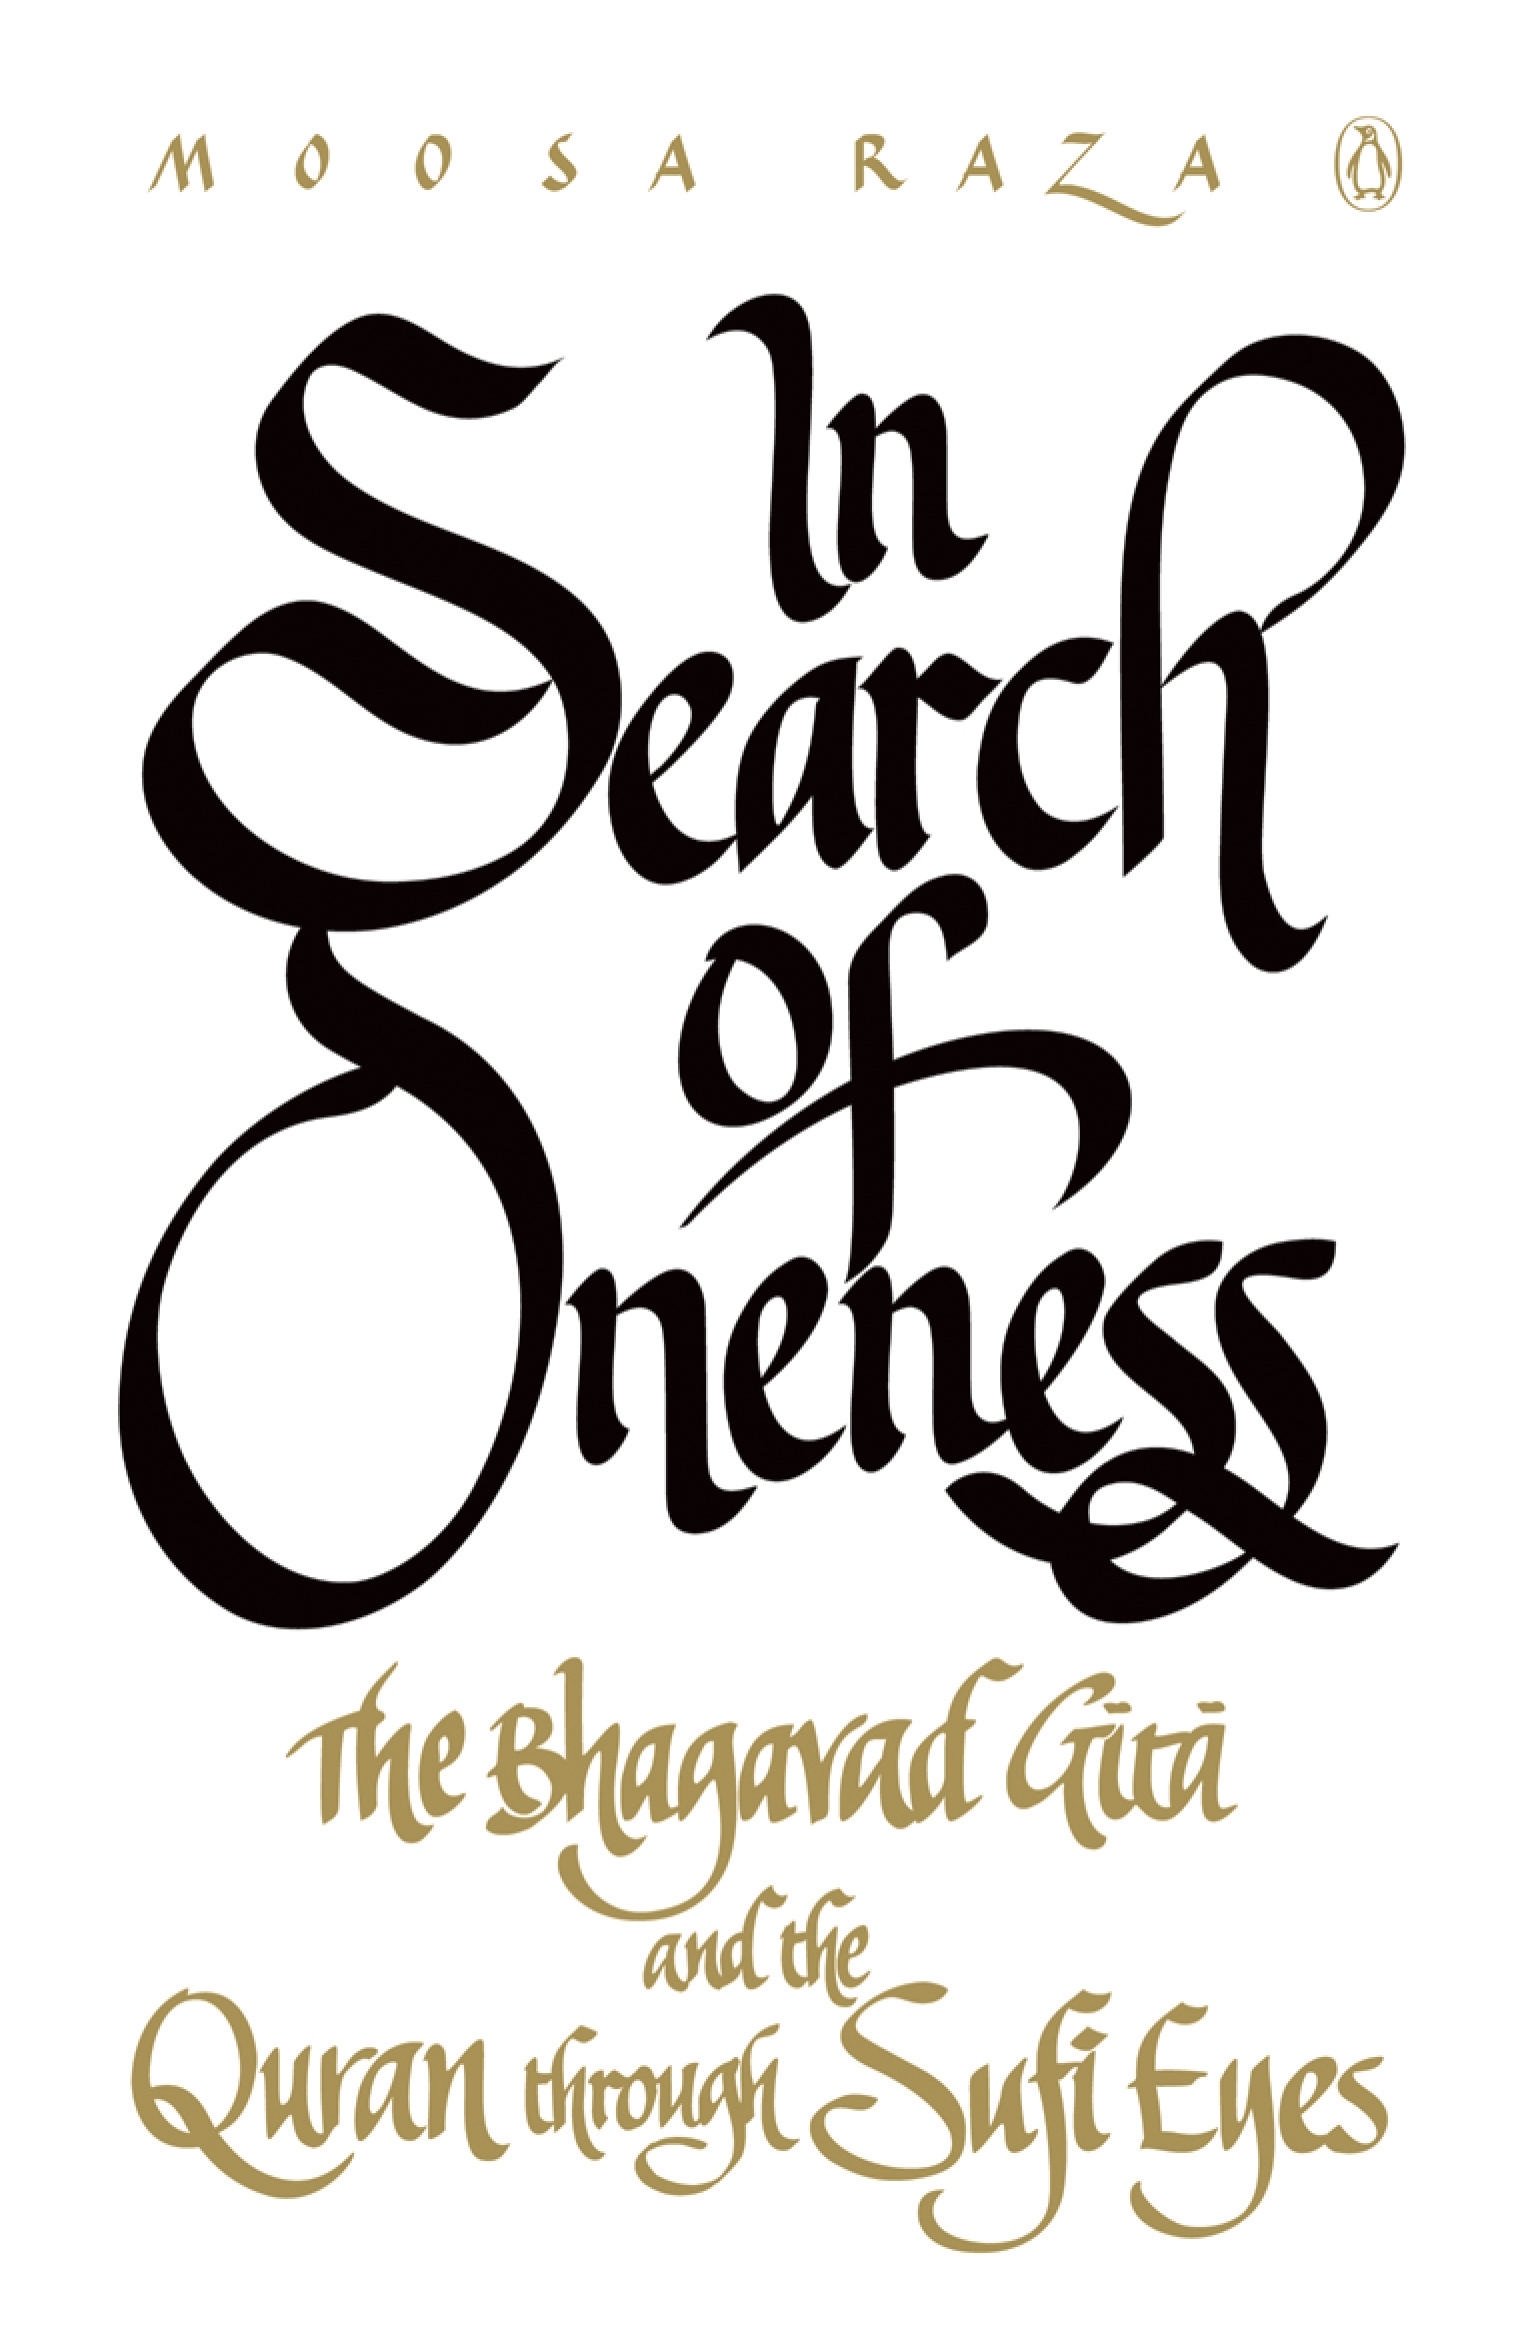 Cover of Moosa Raza's "In Search of Oneness. The Bhagavad Gita and The Quran Through Sufi Eyes" (published by Penguin)